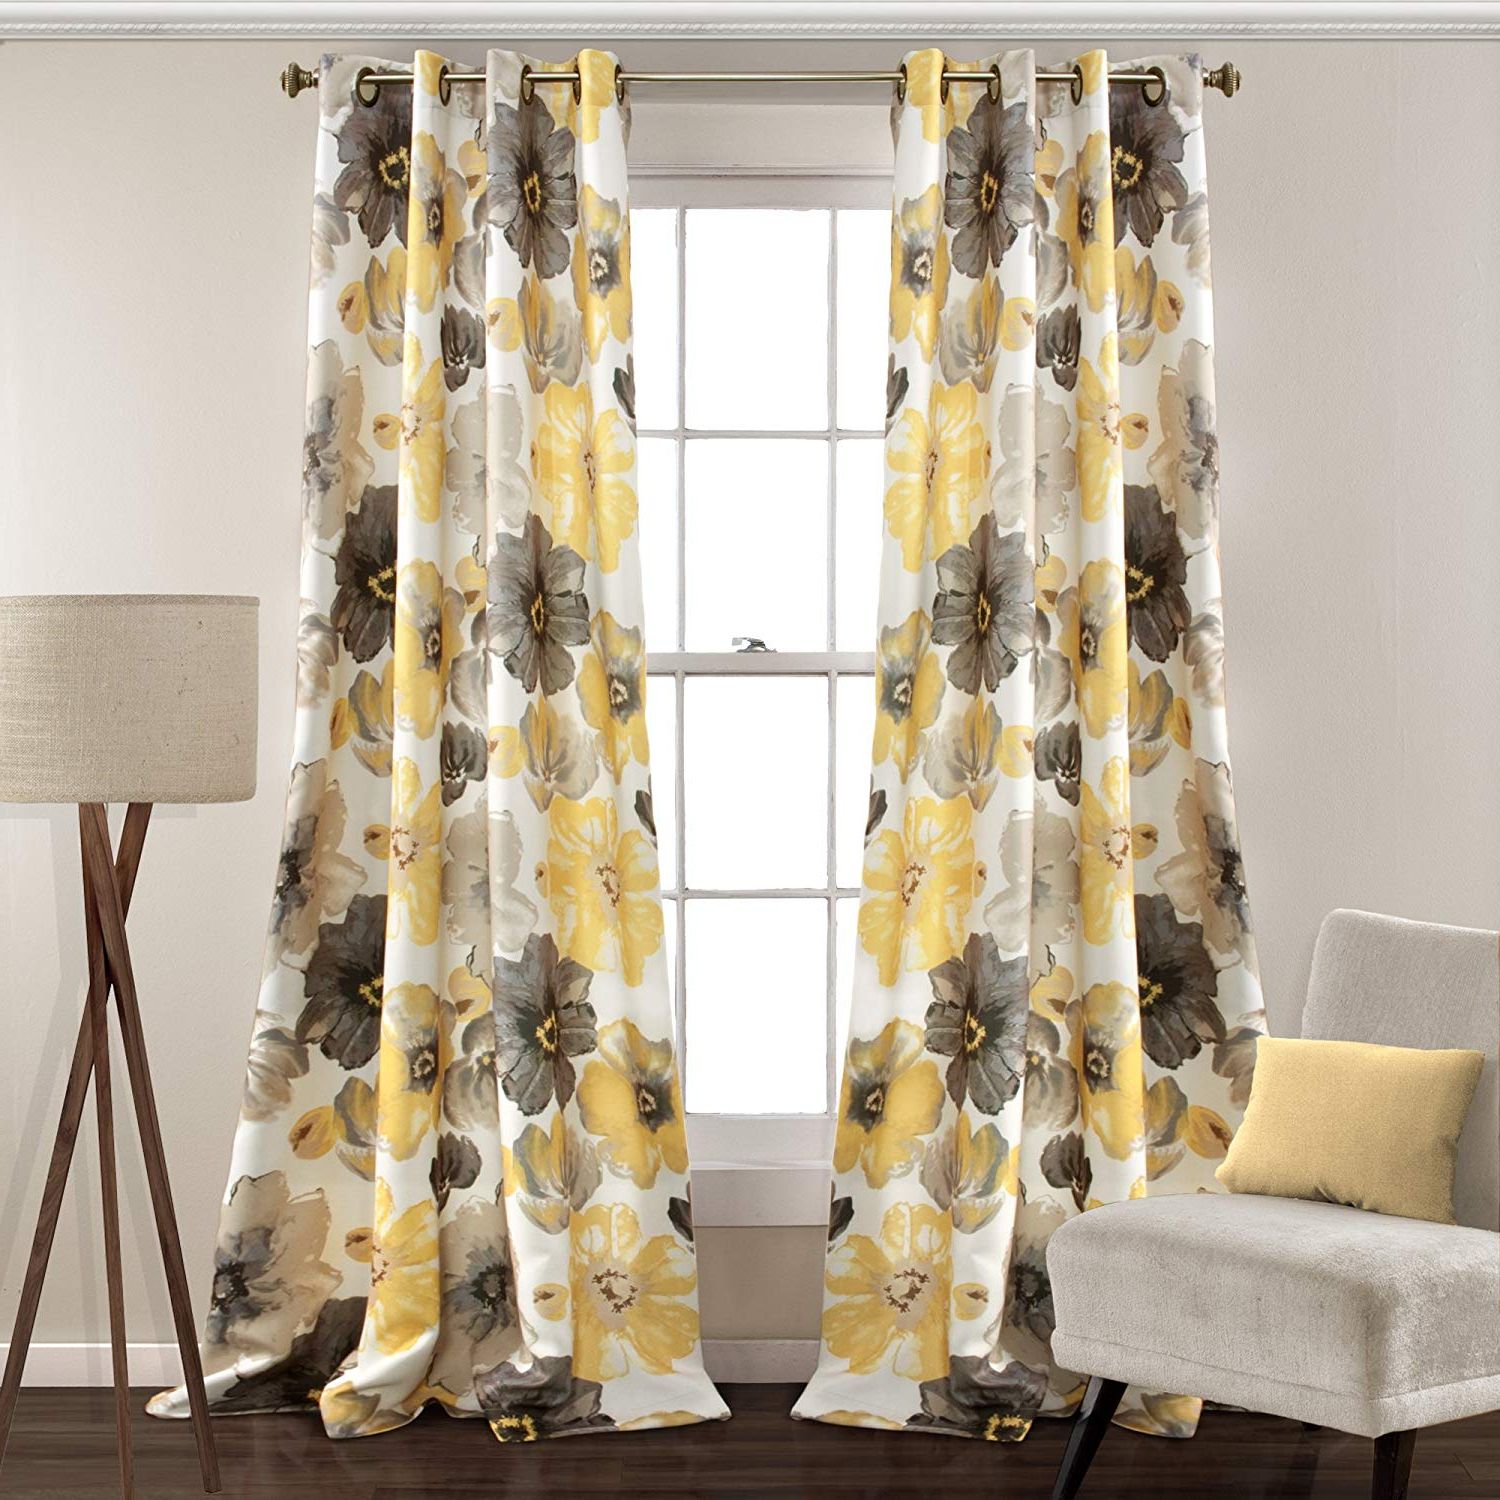 2021 Leah Room Darkening Curtain Panel Pairs Intended For Lush Decor Leah Floral Curtains Room Darkening Window Panel Set For Living  Room, Dining Room, Bedroom (pair), 95” X 52”, Yellow And Gray (View 2 of 20)